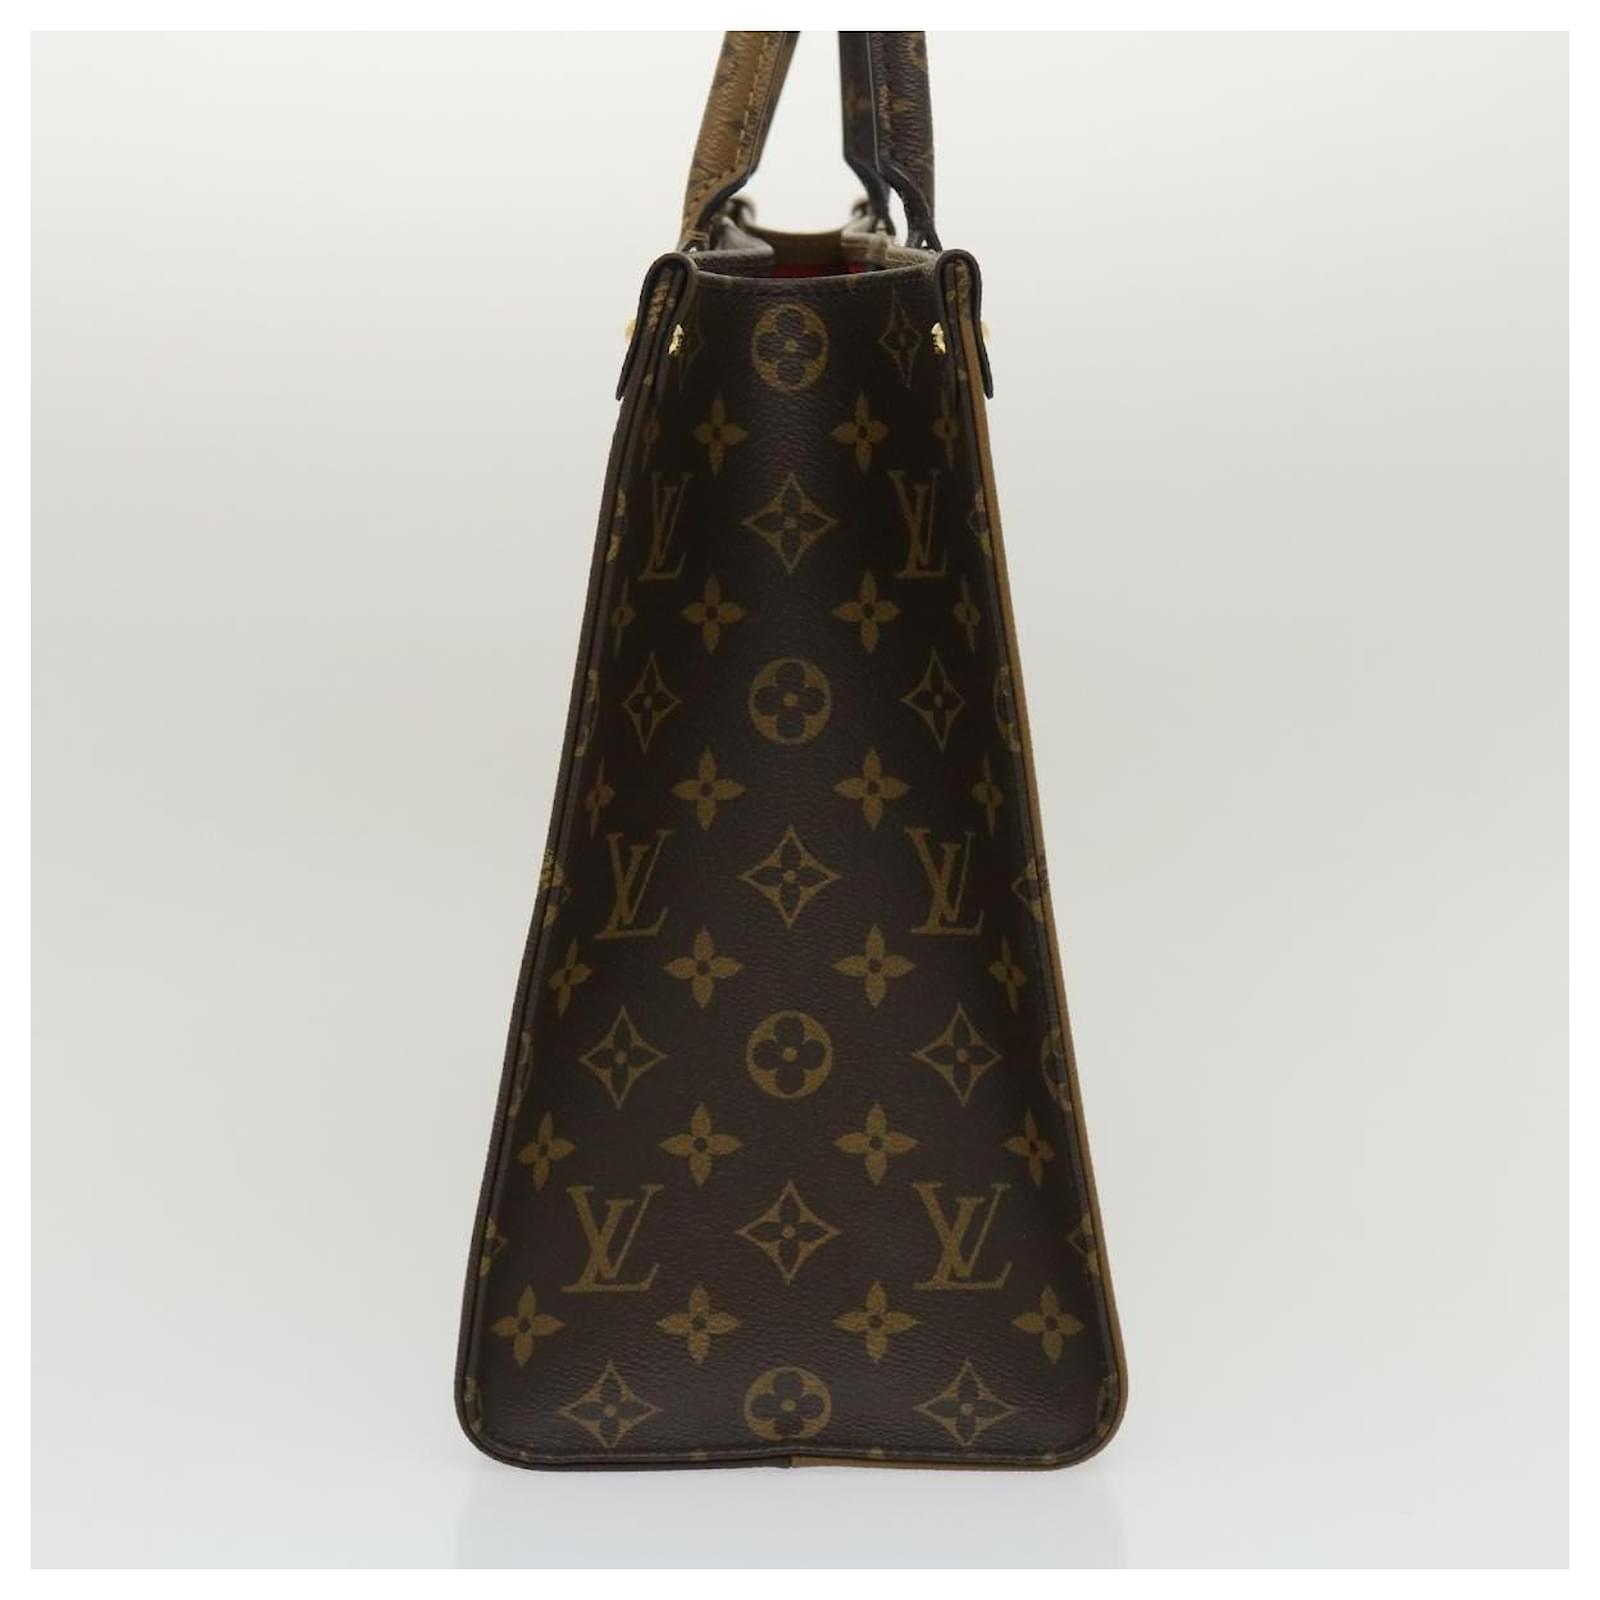 LOUIS VUITTON Monogram Reverse Giant On The Go MM Tote Bag M45321